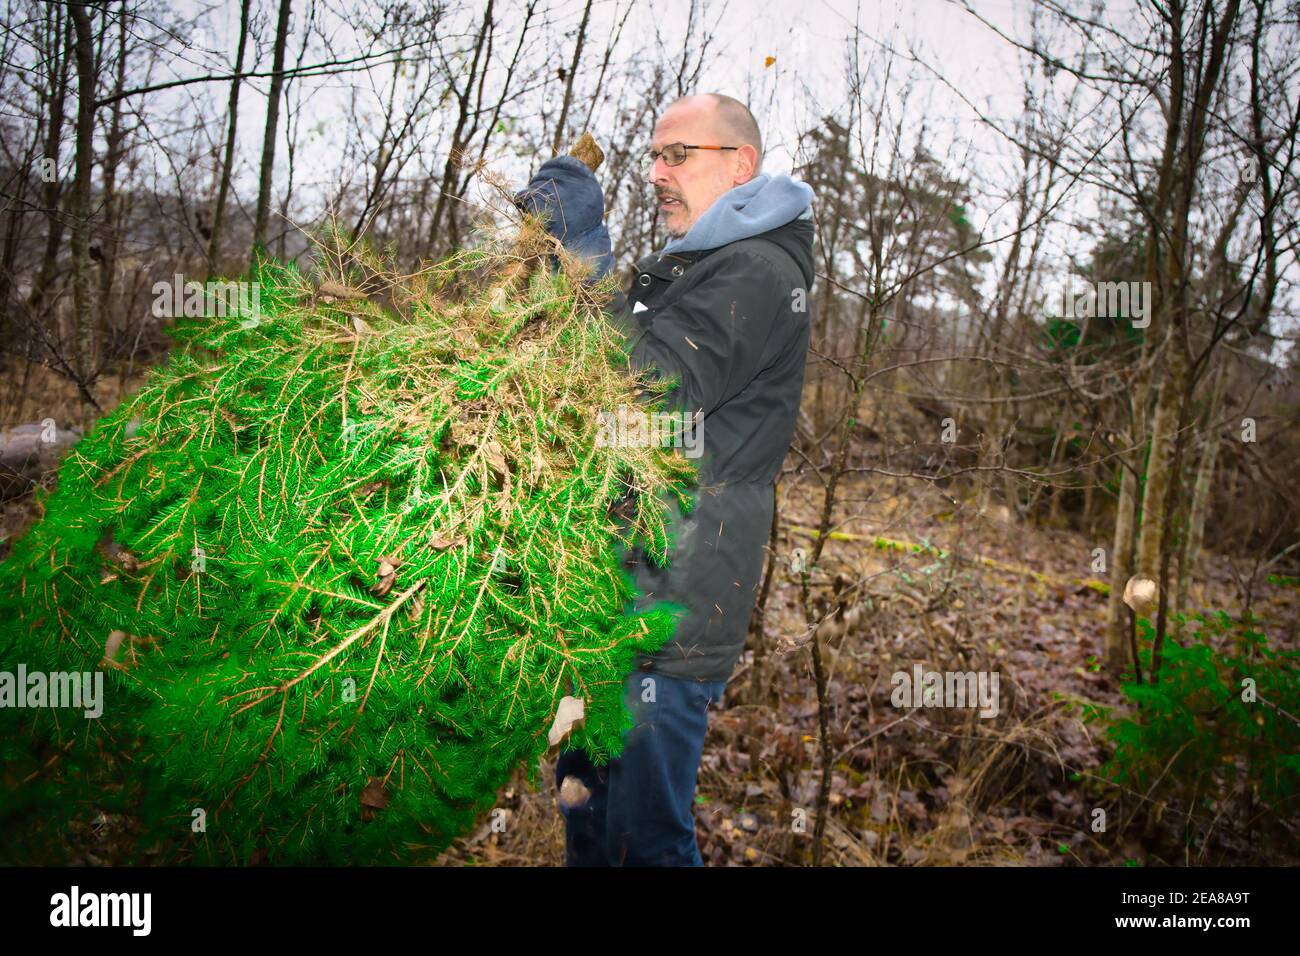 Middle aged man holding newly cut fir tree to be used as Christmas tree, Sweden. Concept of lifestyle, nature, Scandinavia Stock Photo